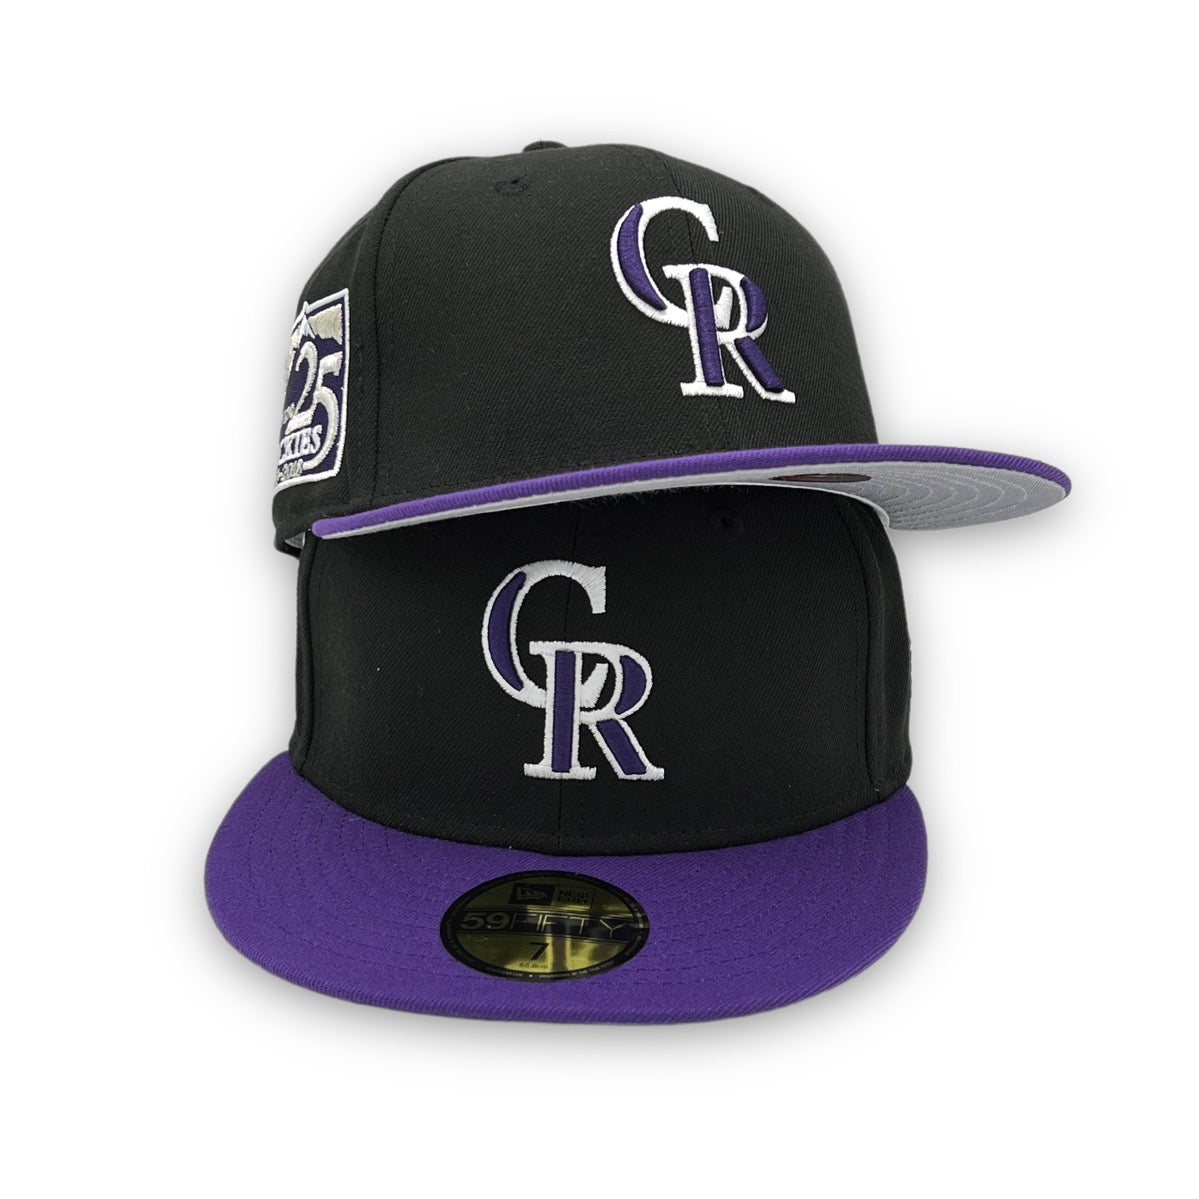 New Era Colorado Rockies Baseball Fitted Hat Cap Size 7 5/8